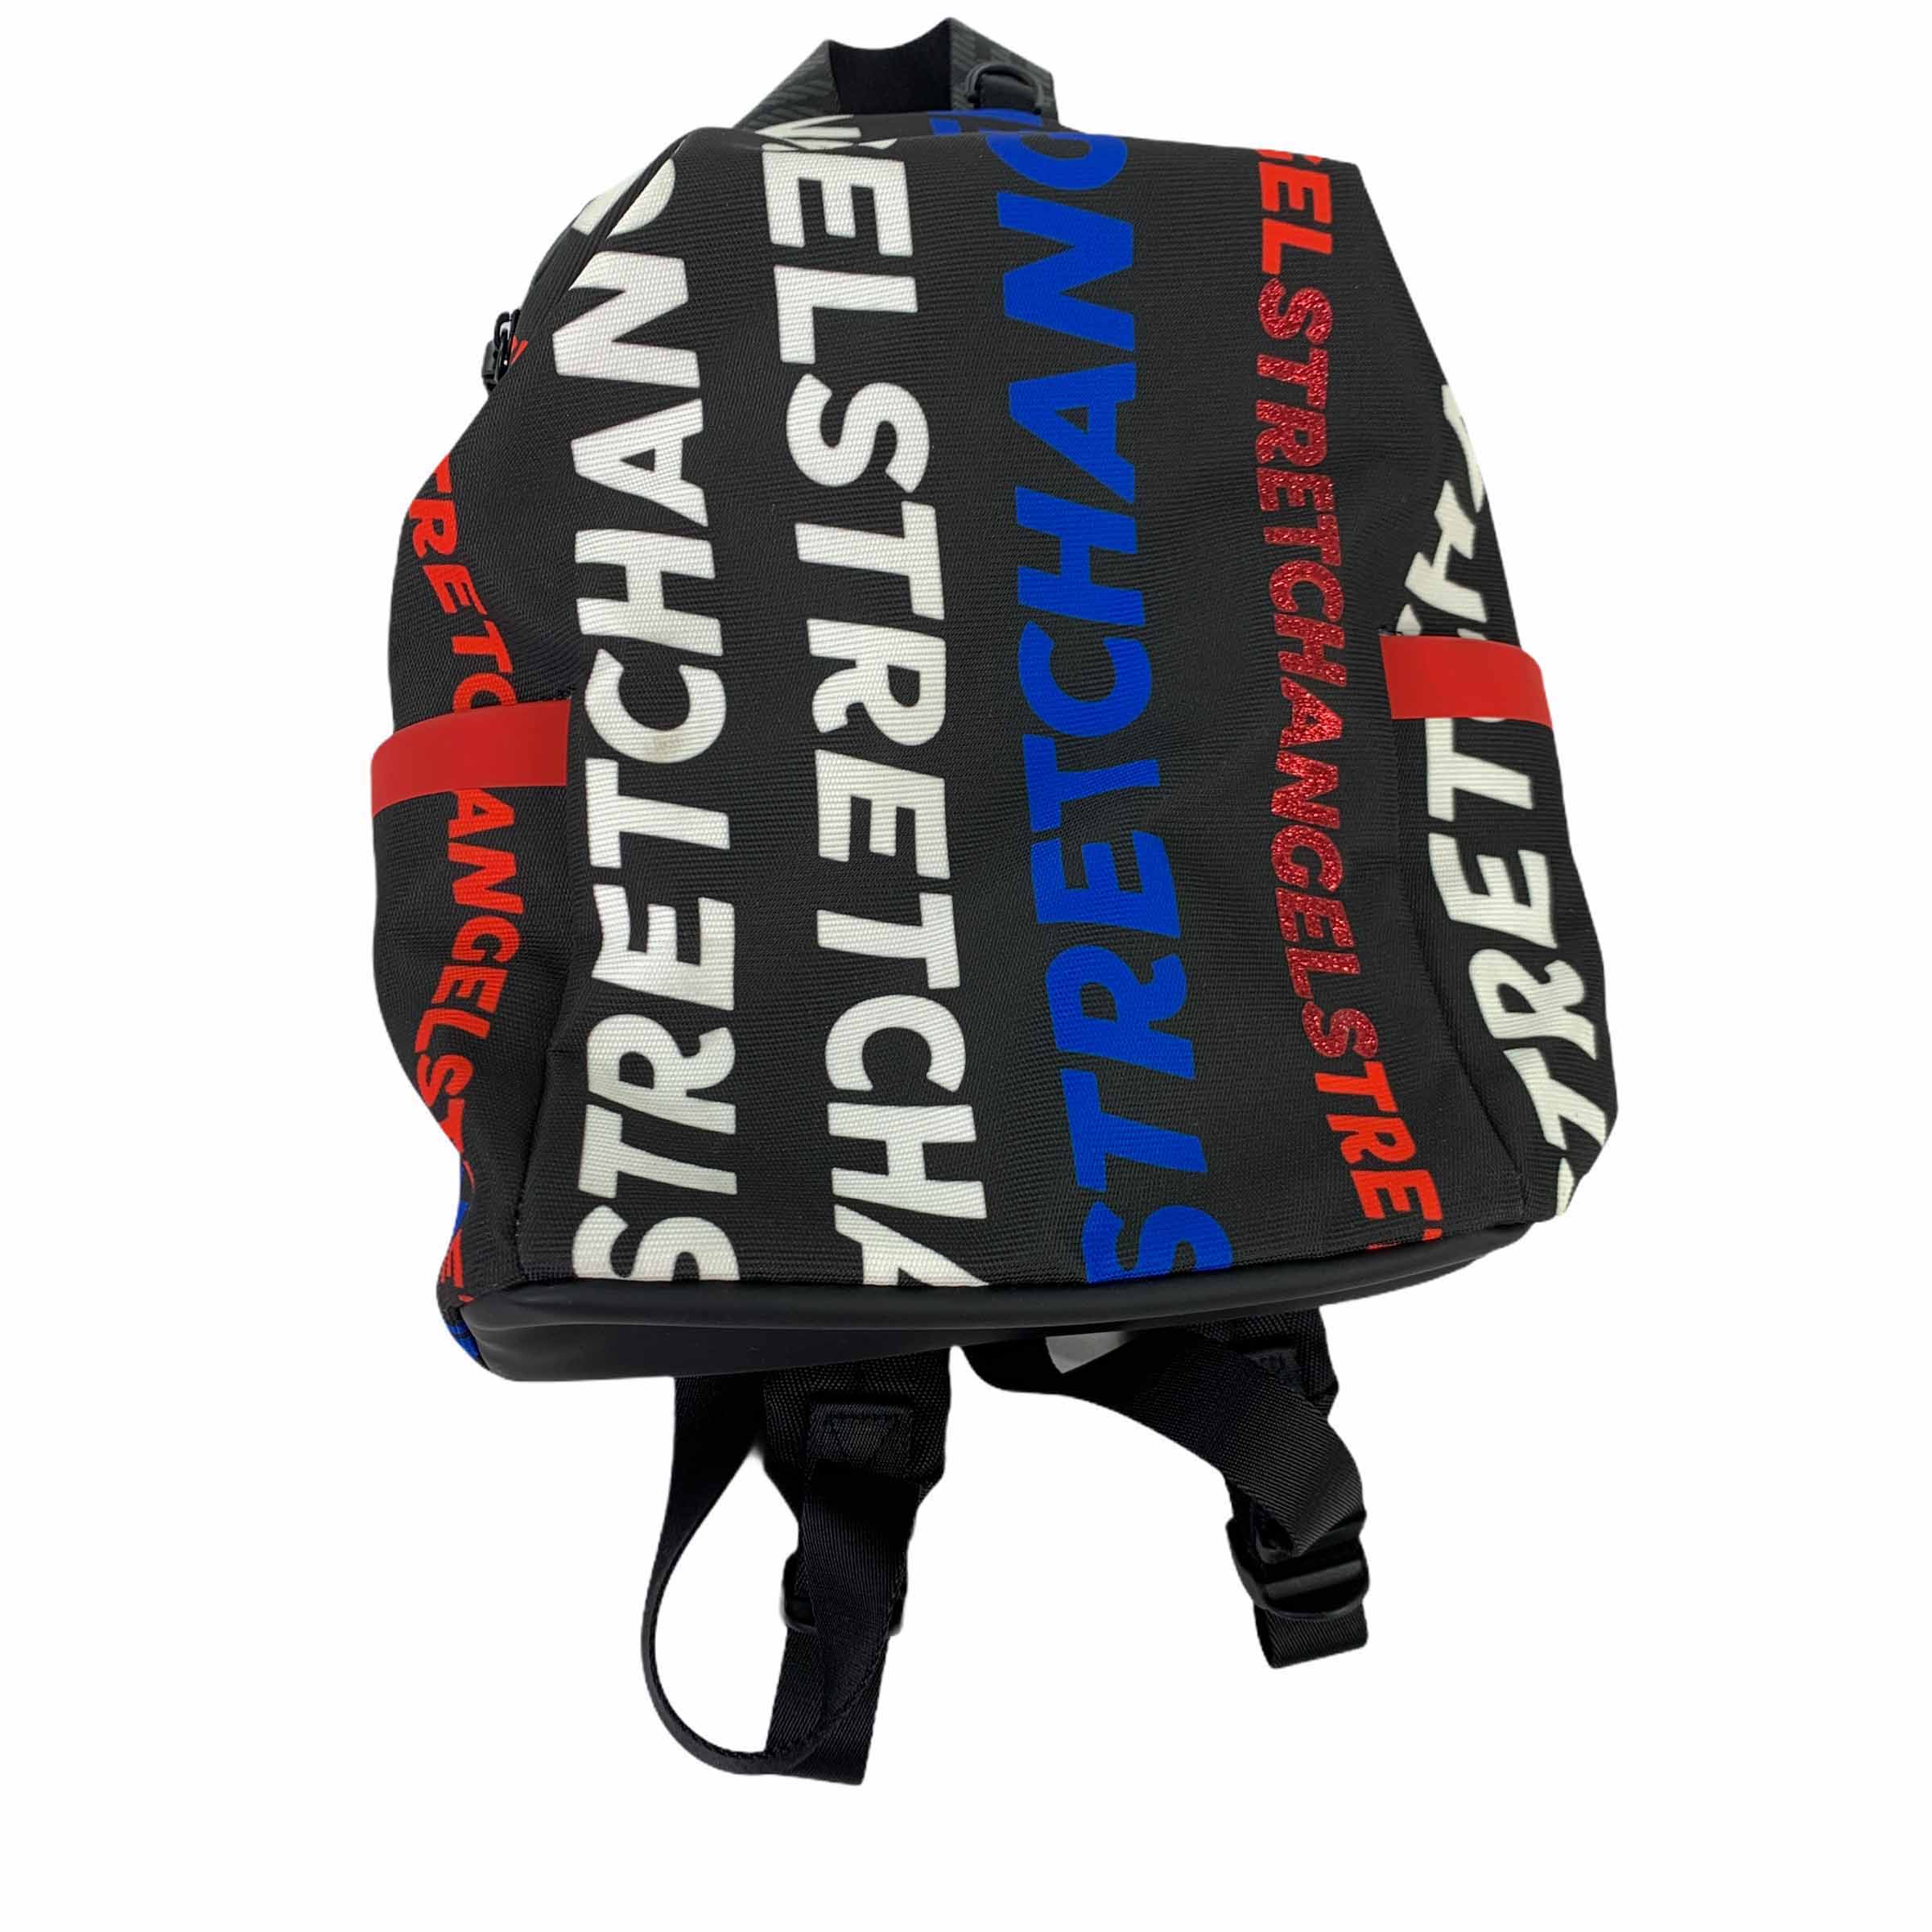 [Strech Angels] Pocket Round Backpack  - Size Free